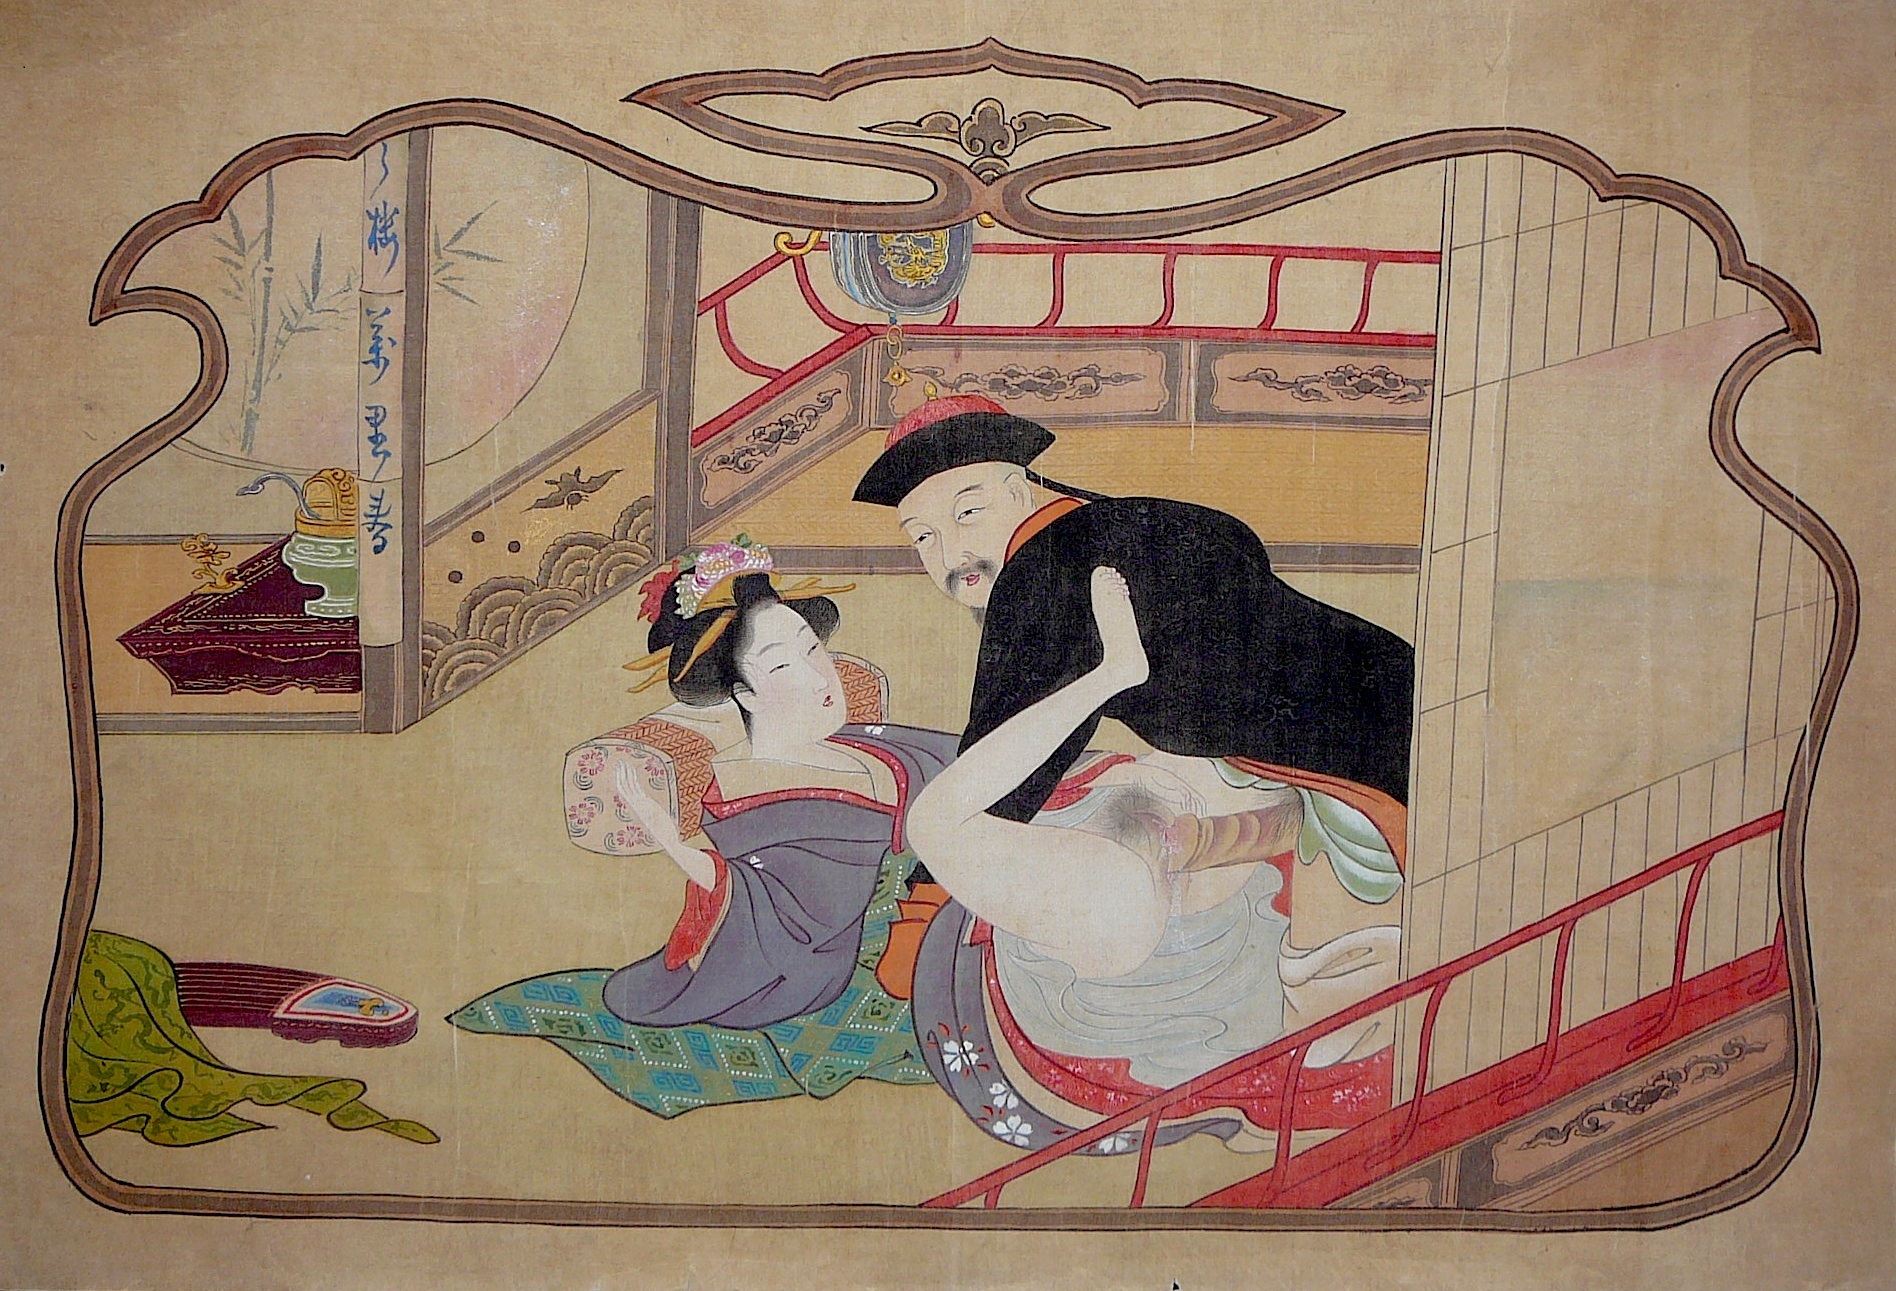 A Chinese merchant making love to a Japanese prostitute by Hosoda Eishi